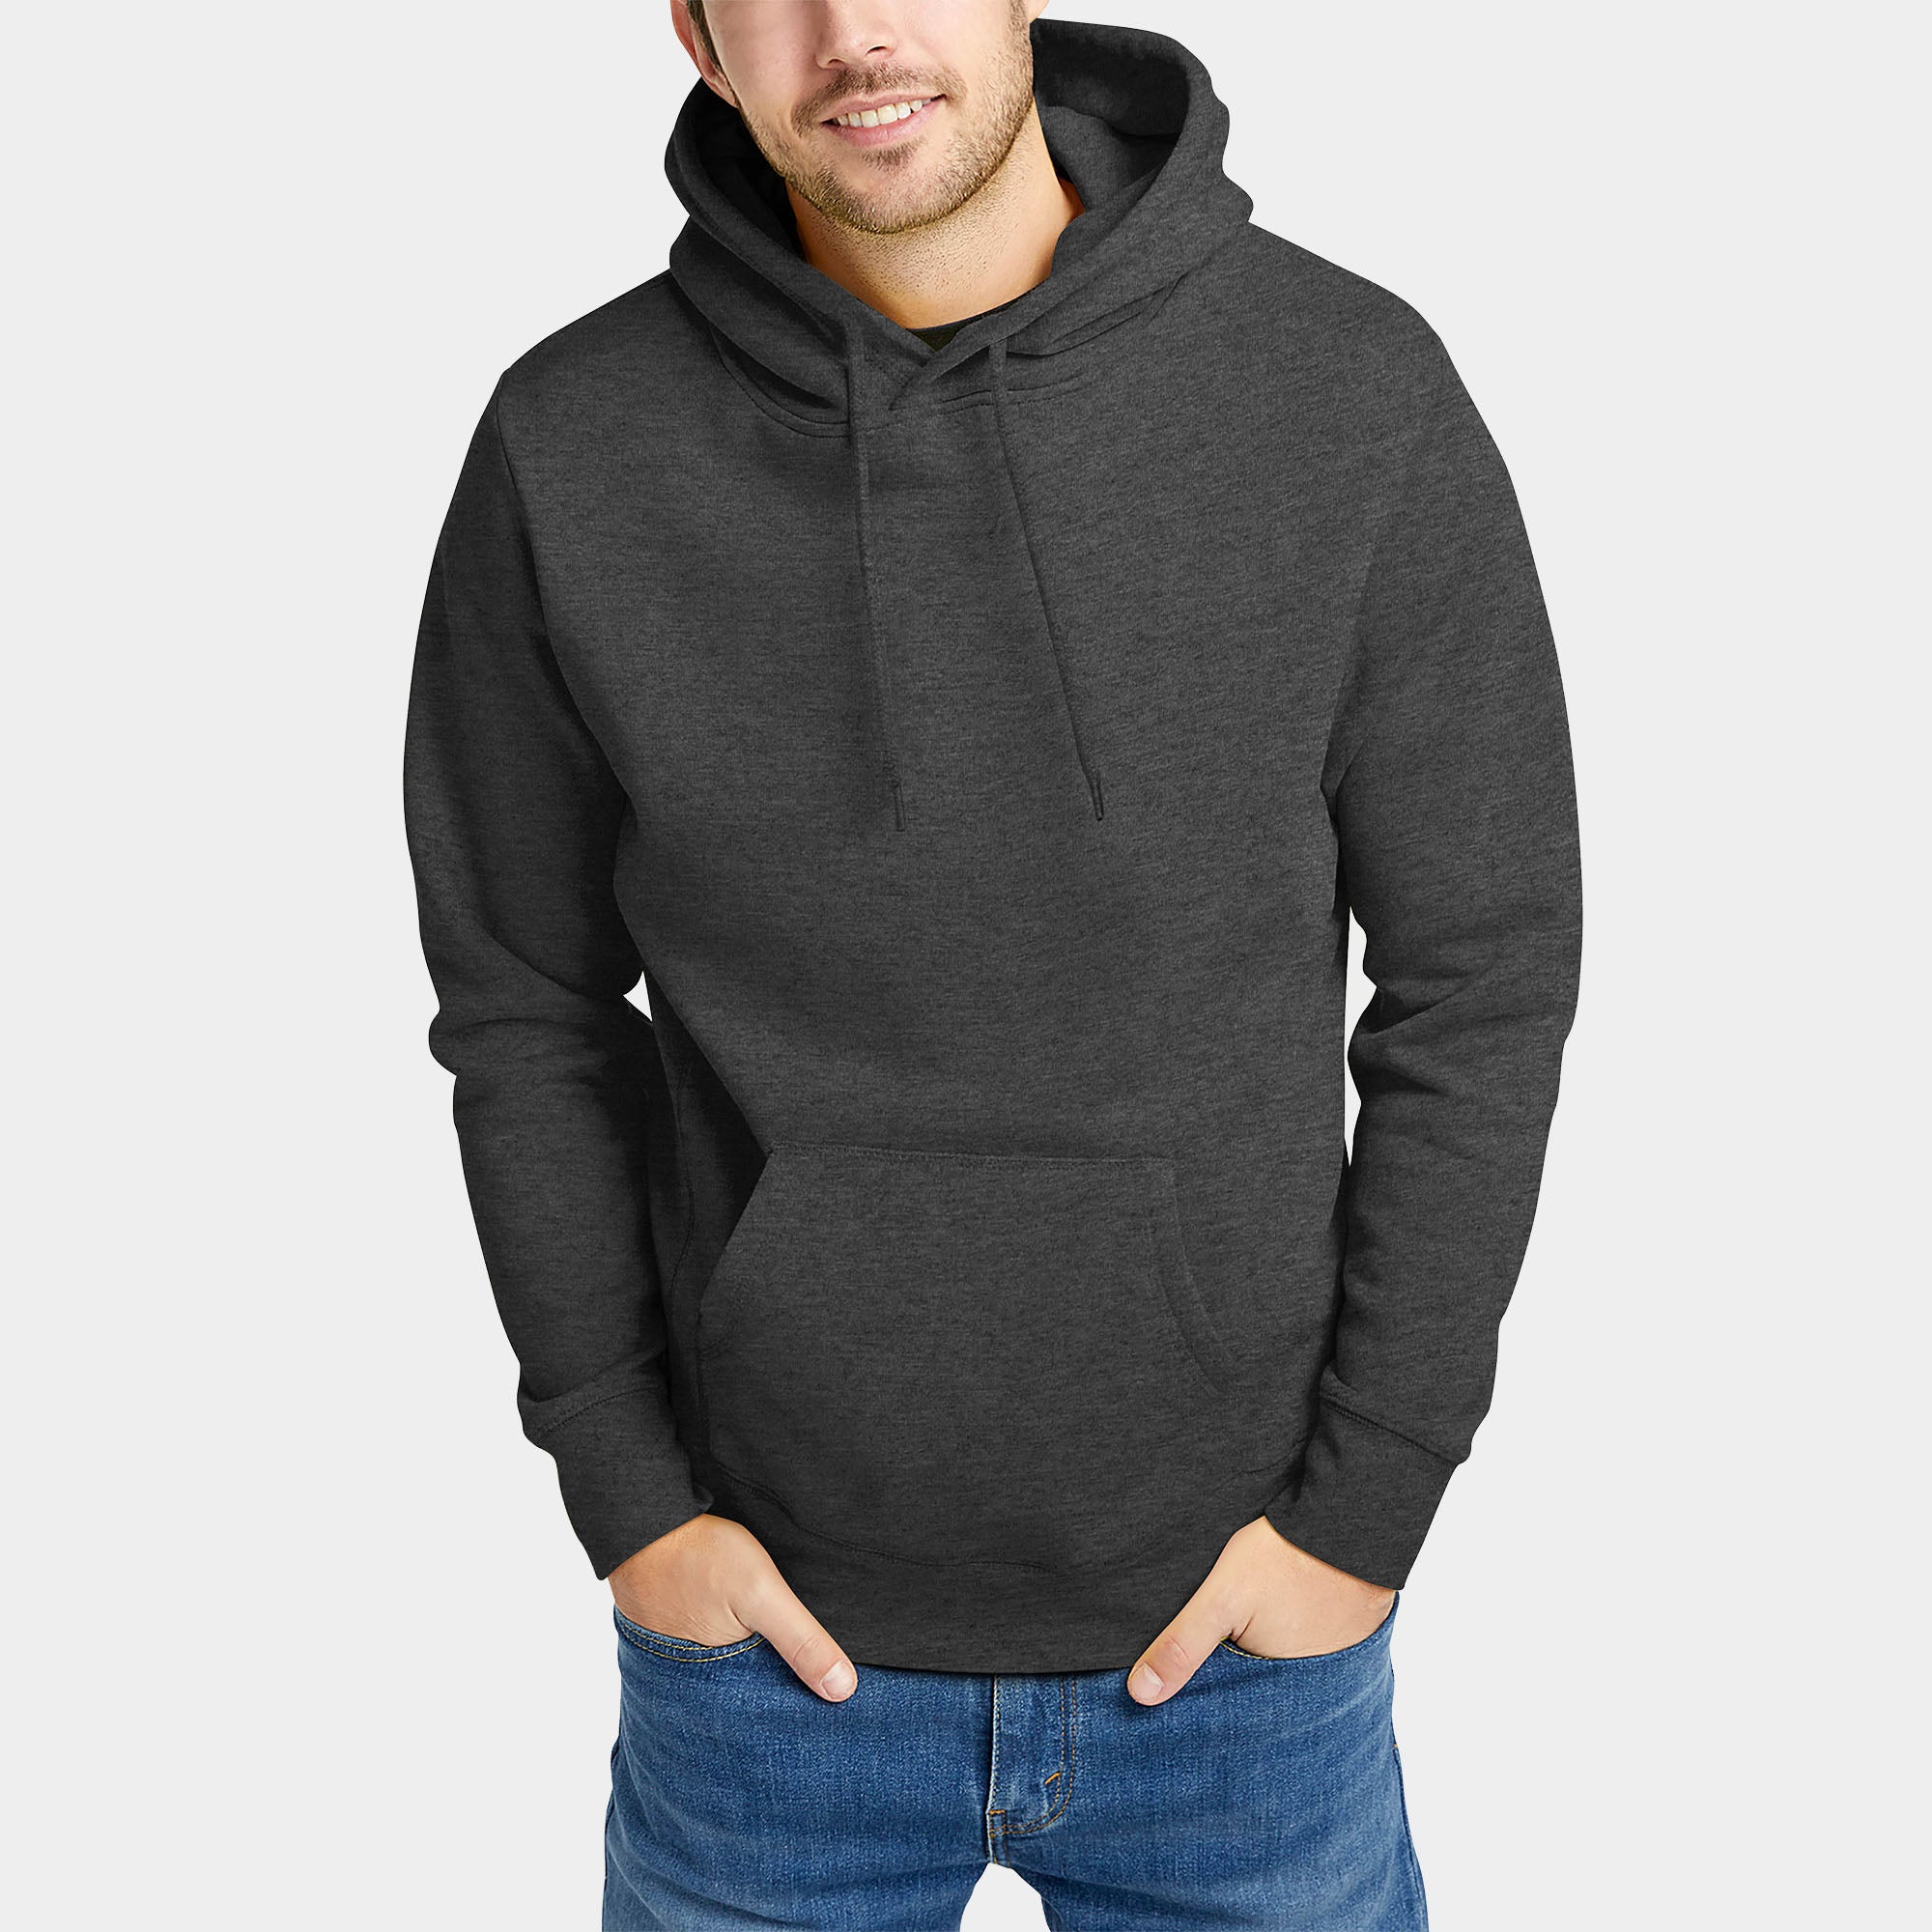 pullover_hoodie_for_men_black friday_deal_holiday gift_best hooded sweatshirts_printing_team sports_club uniform_screen dtg_heat transfer_dye embroidery_sublimation_ash pink_camo_sherpa lined_unisex_pink_black hoodie_men pullover_cotton apparel_lightweight_sweatshirt_hooded_beefy_ultimate_Charcoalheath